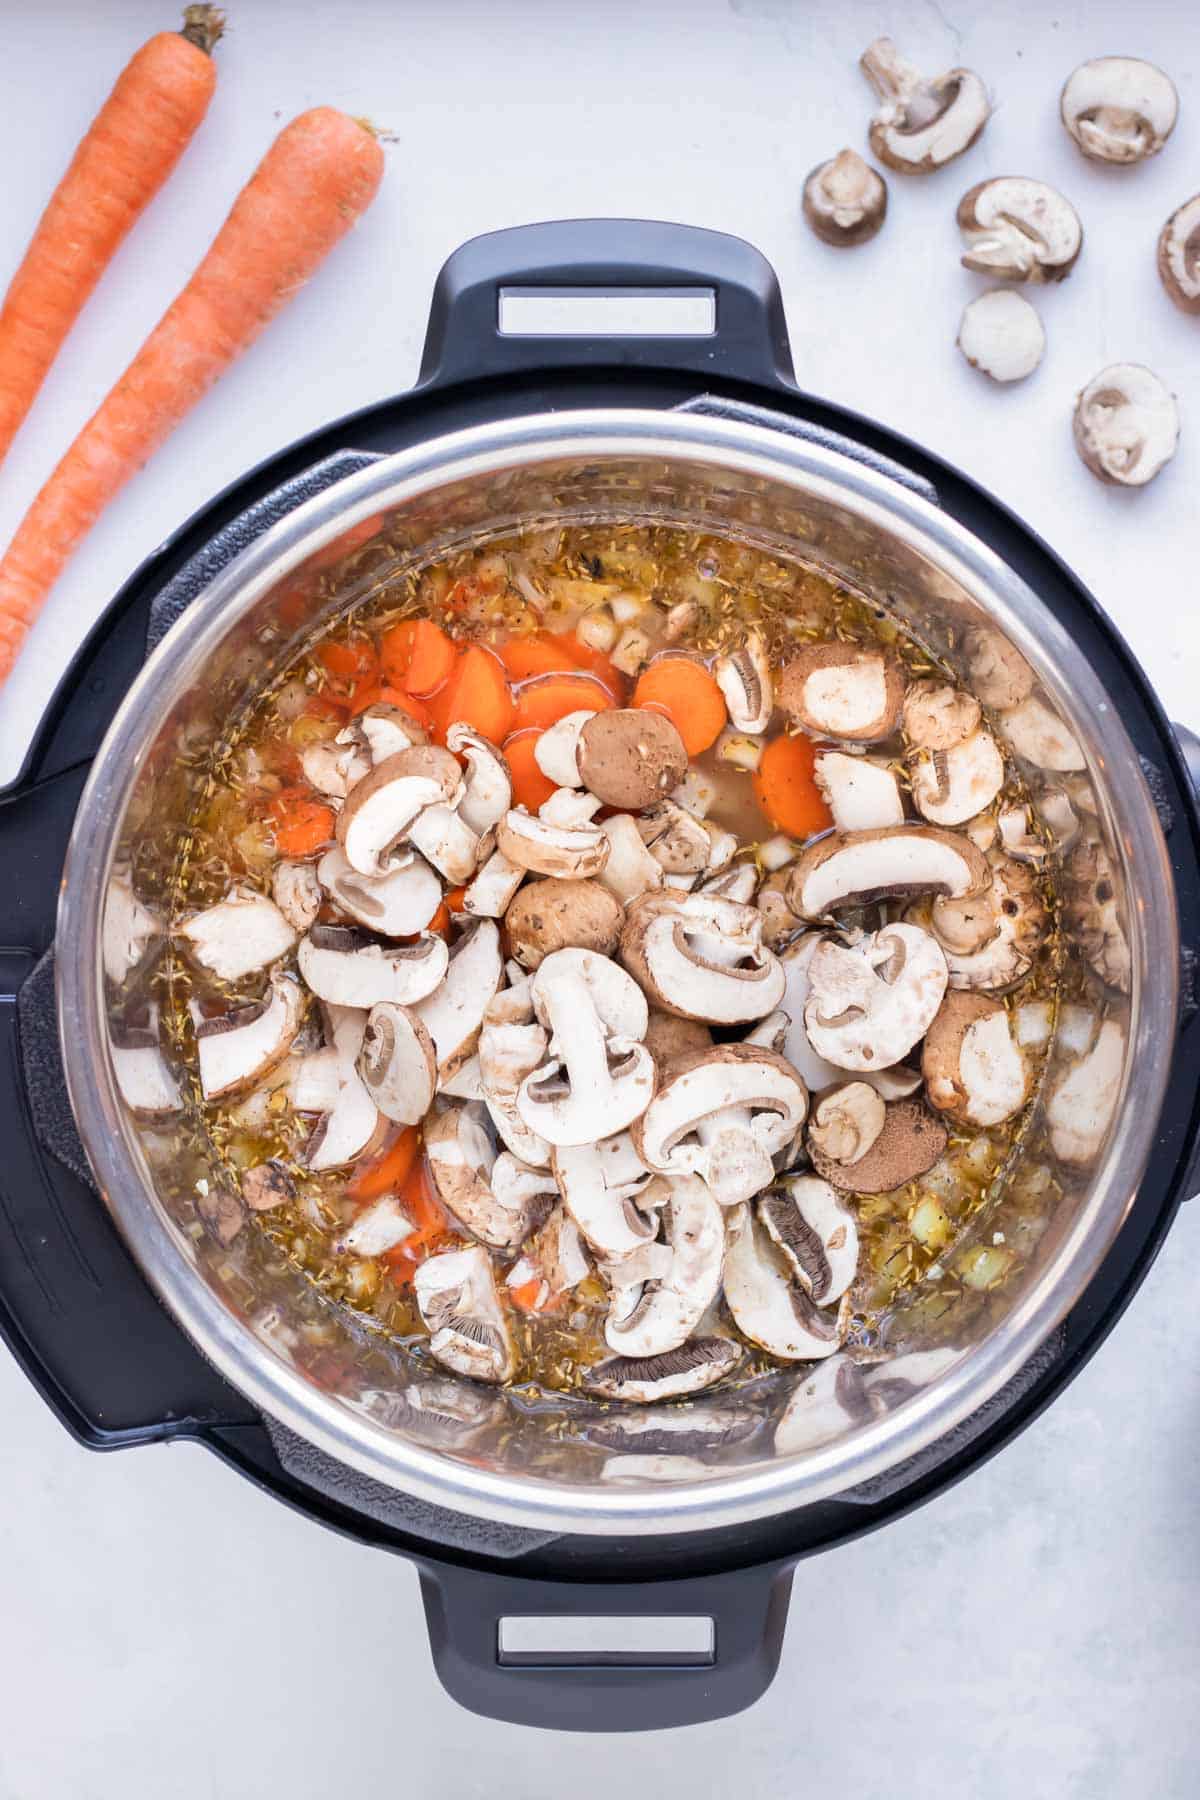 Mushrooms and carrots are added to the pressure cooker